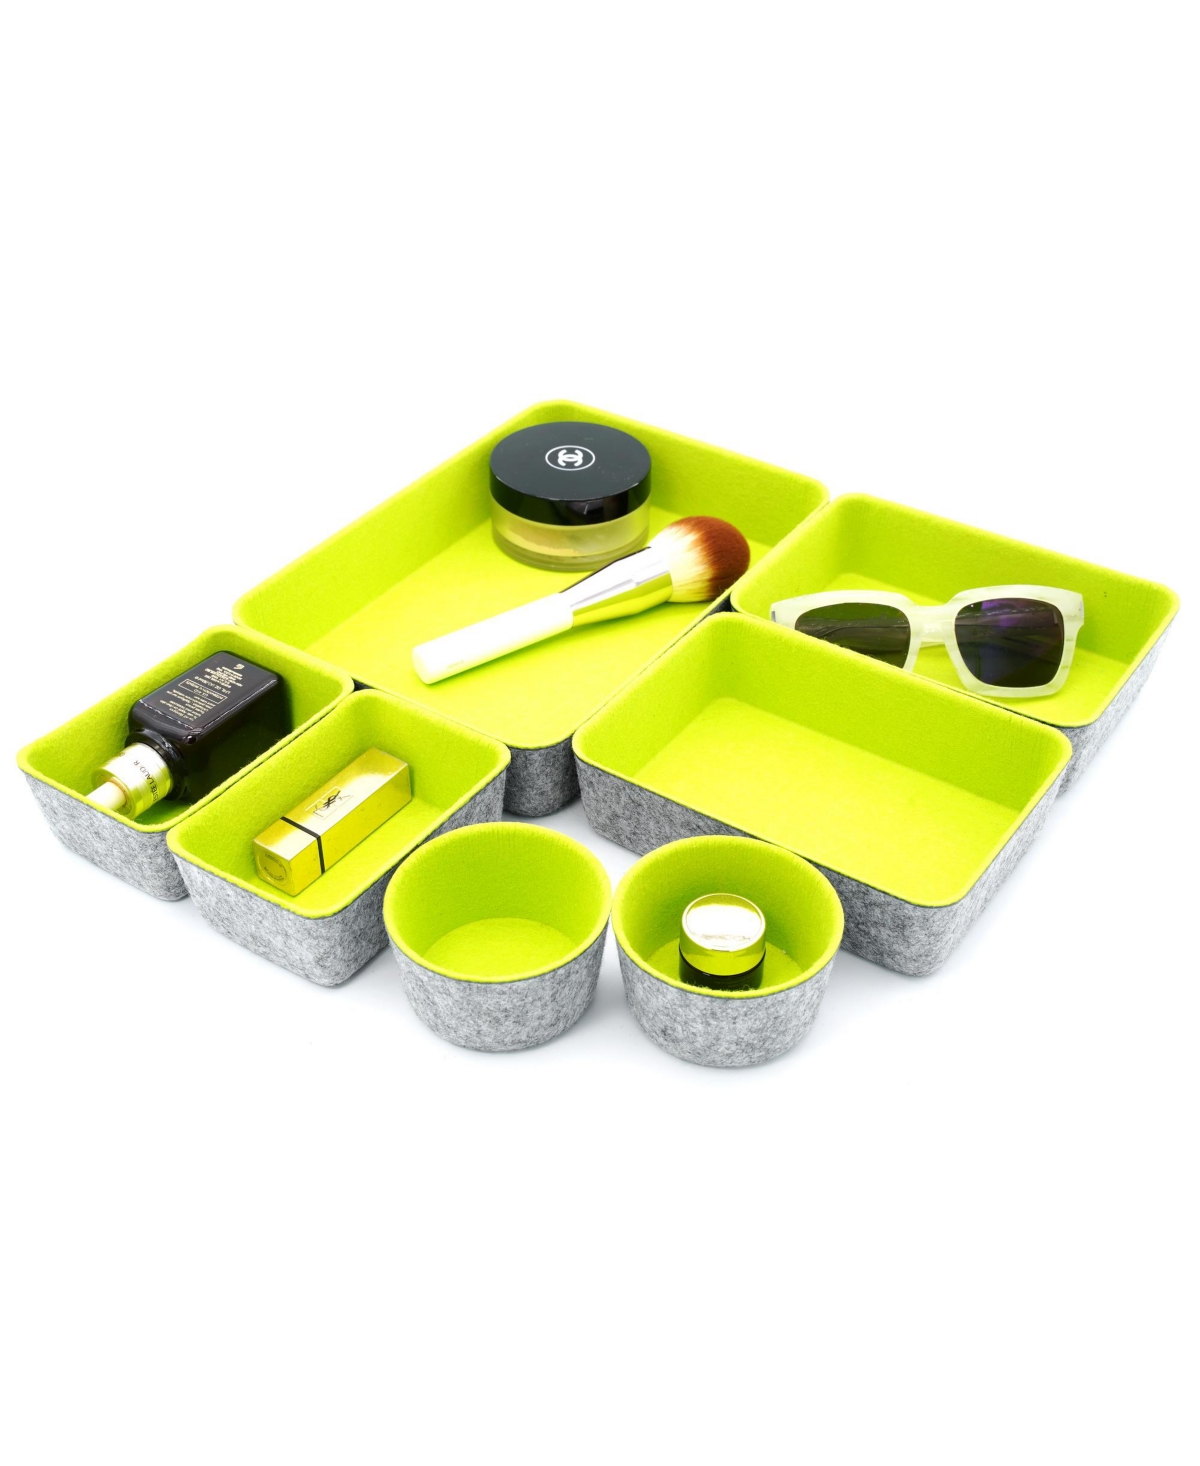 Shop Welaxy 7 Piece Felt Drawer Organizer Set With Round Cups And Trays In Green